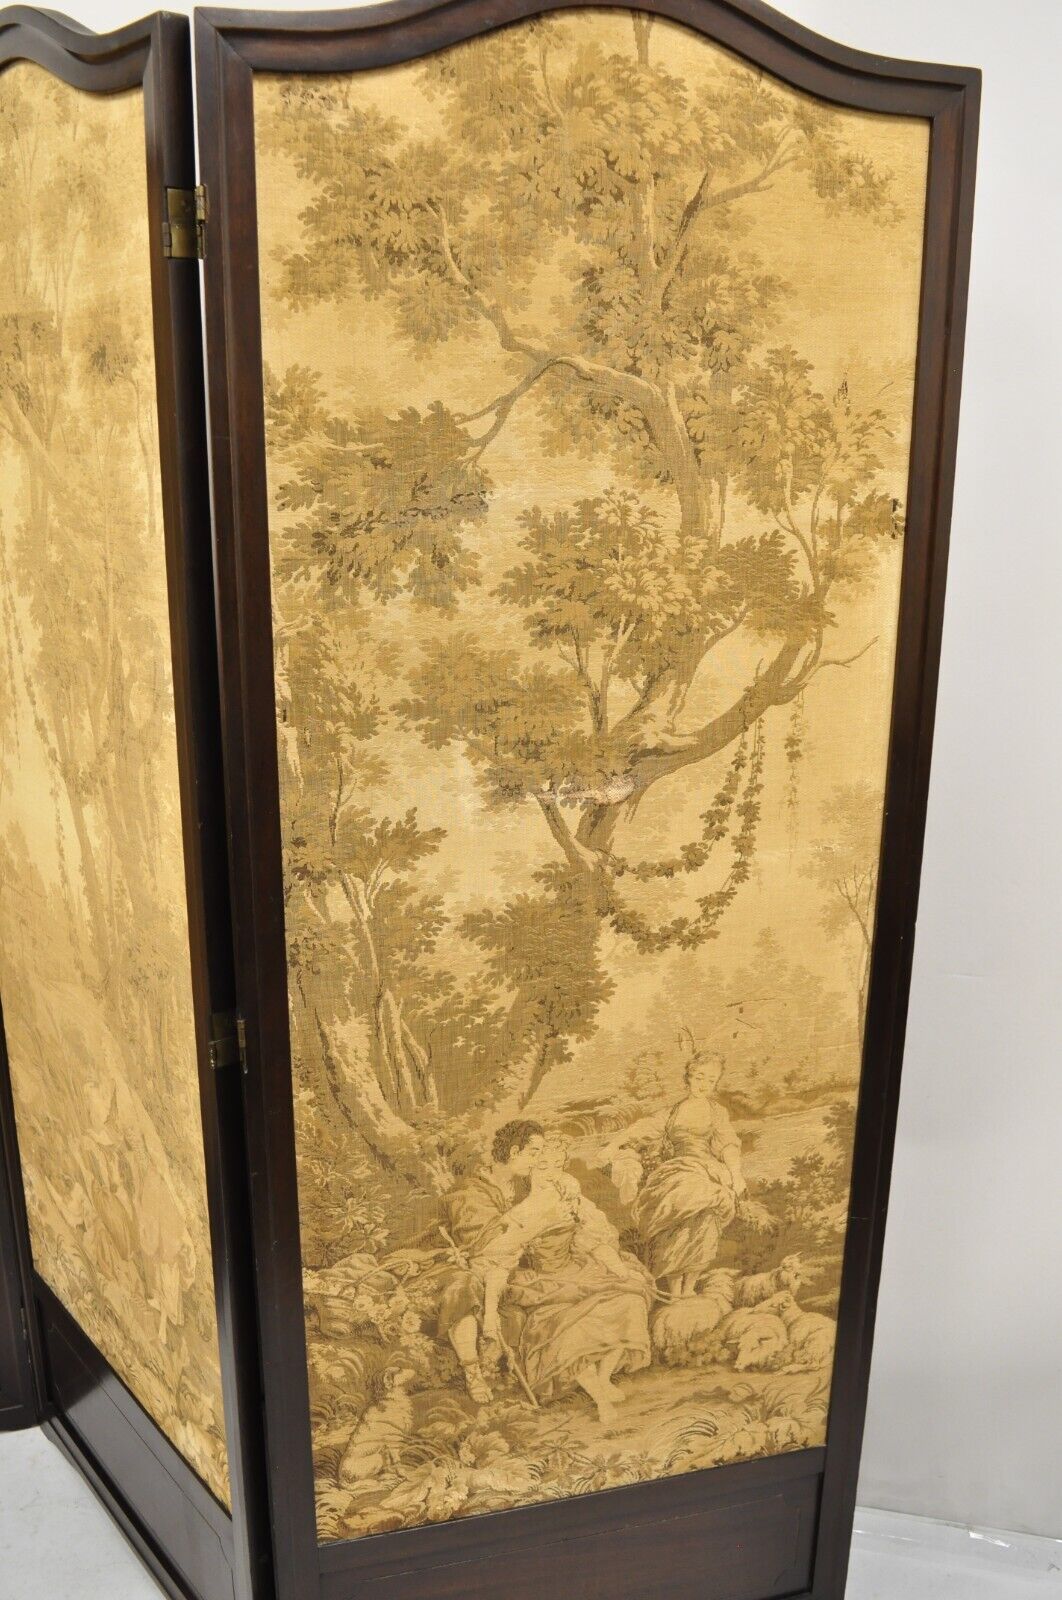 Antique Victorian French Tapestry Mahogany Frame 3 Panel Screen Room Divider